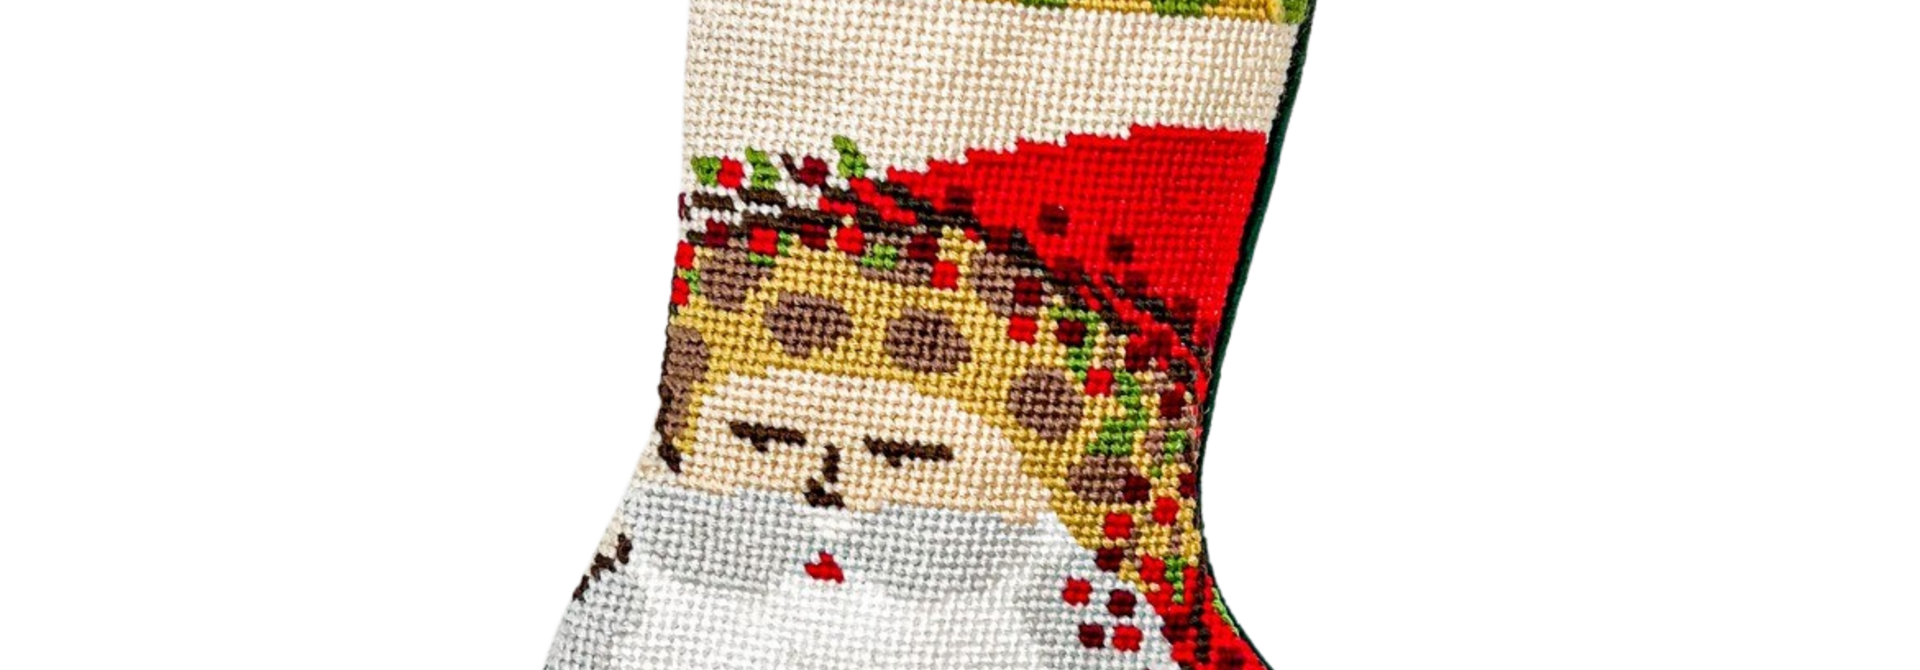 Santa in Leopard | The Bauble Stocking Collection - 4.25 Inch x 6 Inch